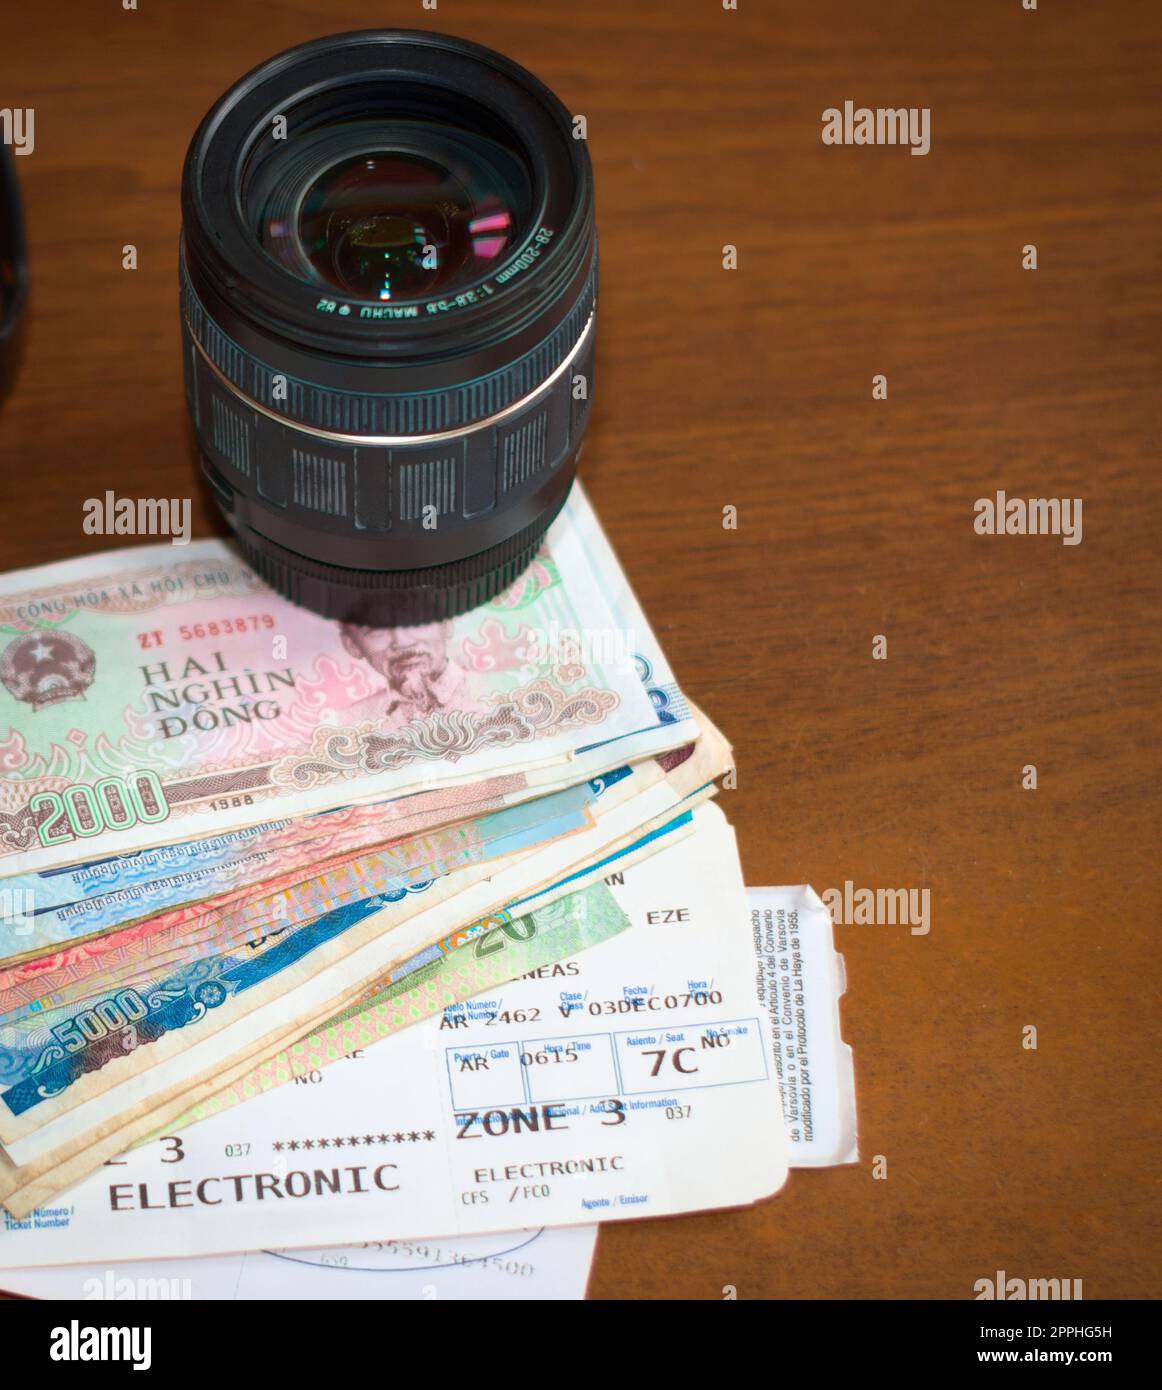 Camera lens, foreign money and aircraft boarding pass on a wooden table. Tourism, vacation, travel photography equipment. Stock Photo